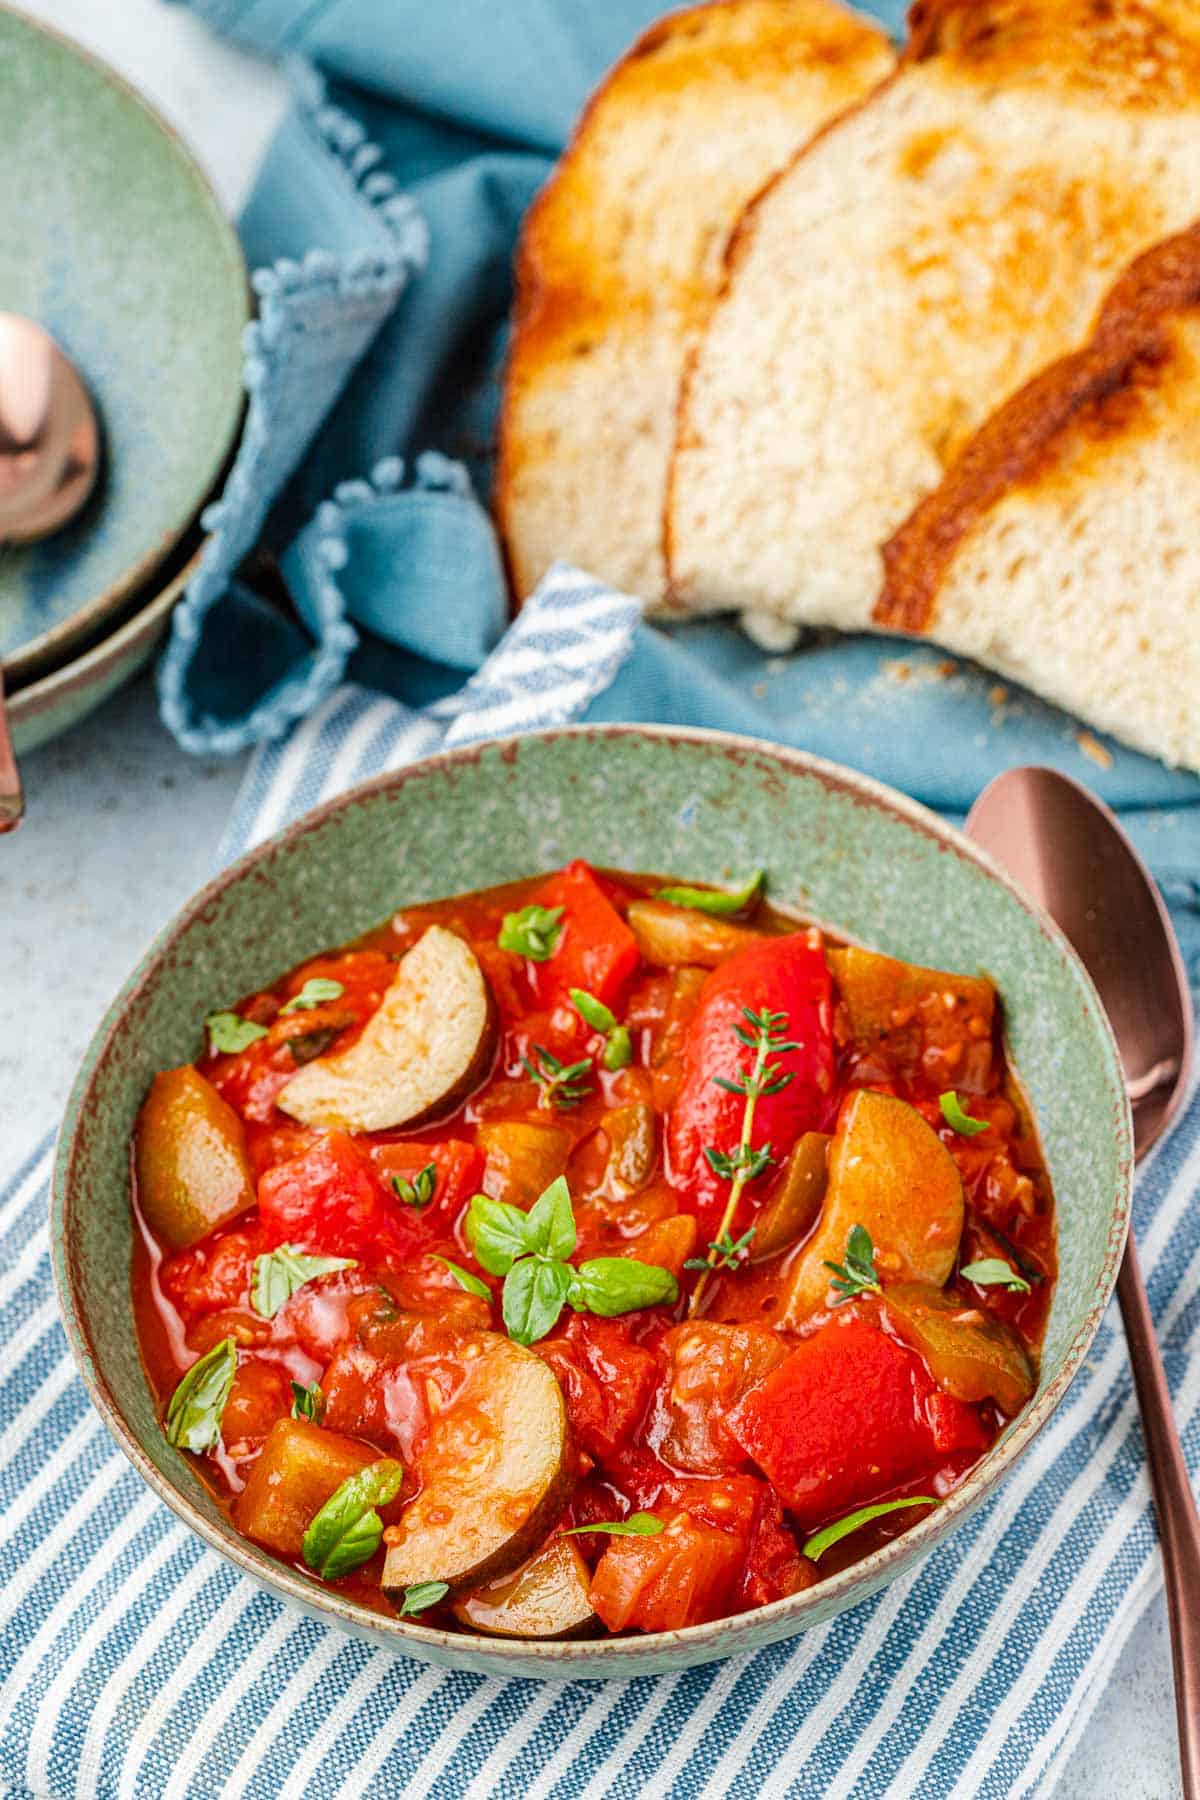 ratatouille in a bowl next to a spoon, and slices of toasted bread.